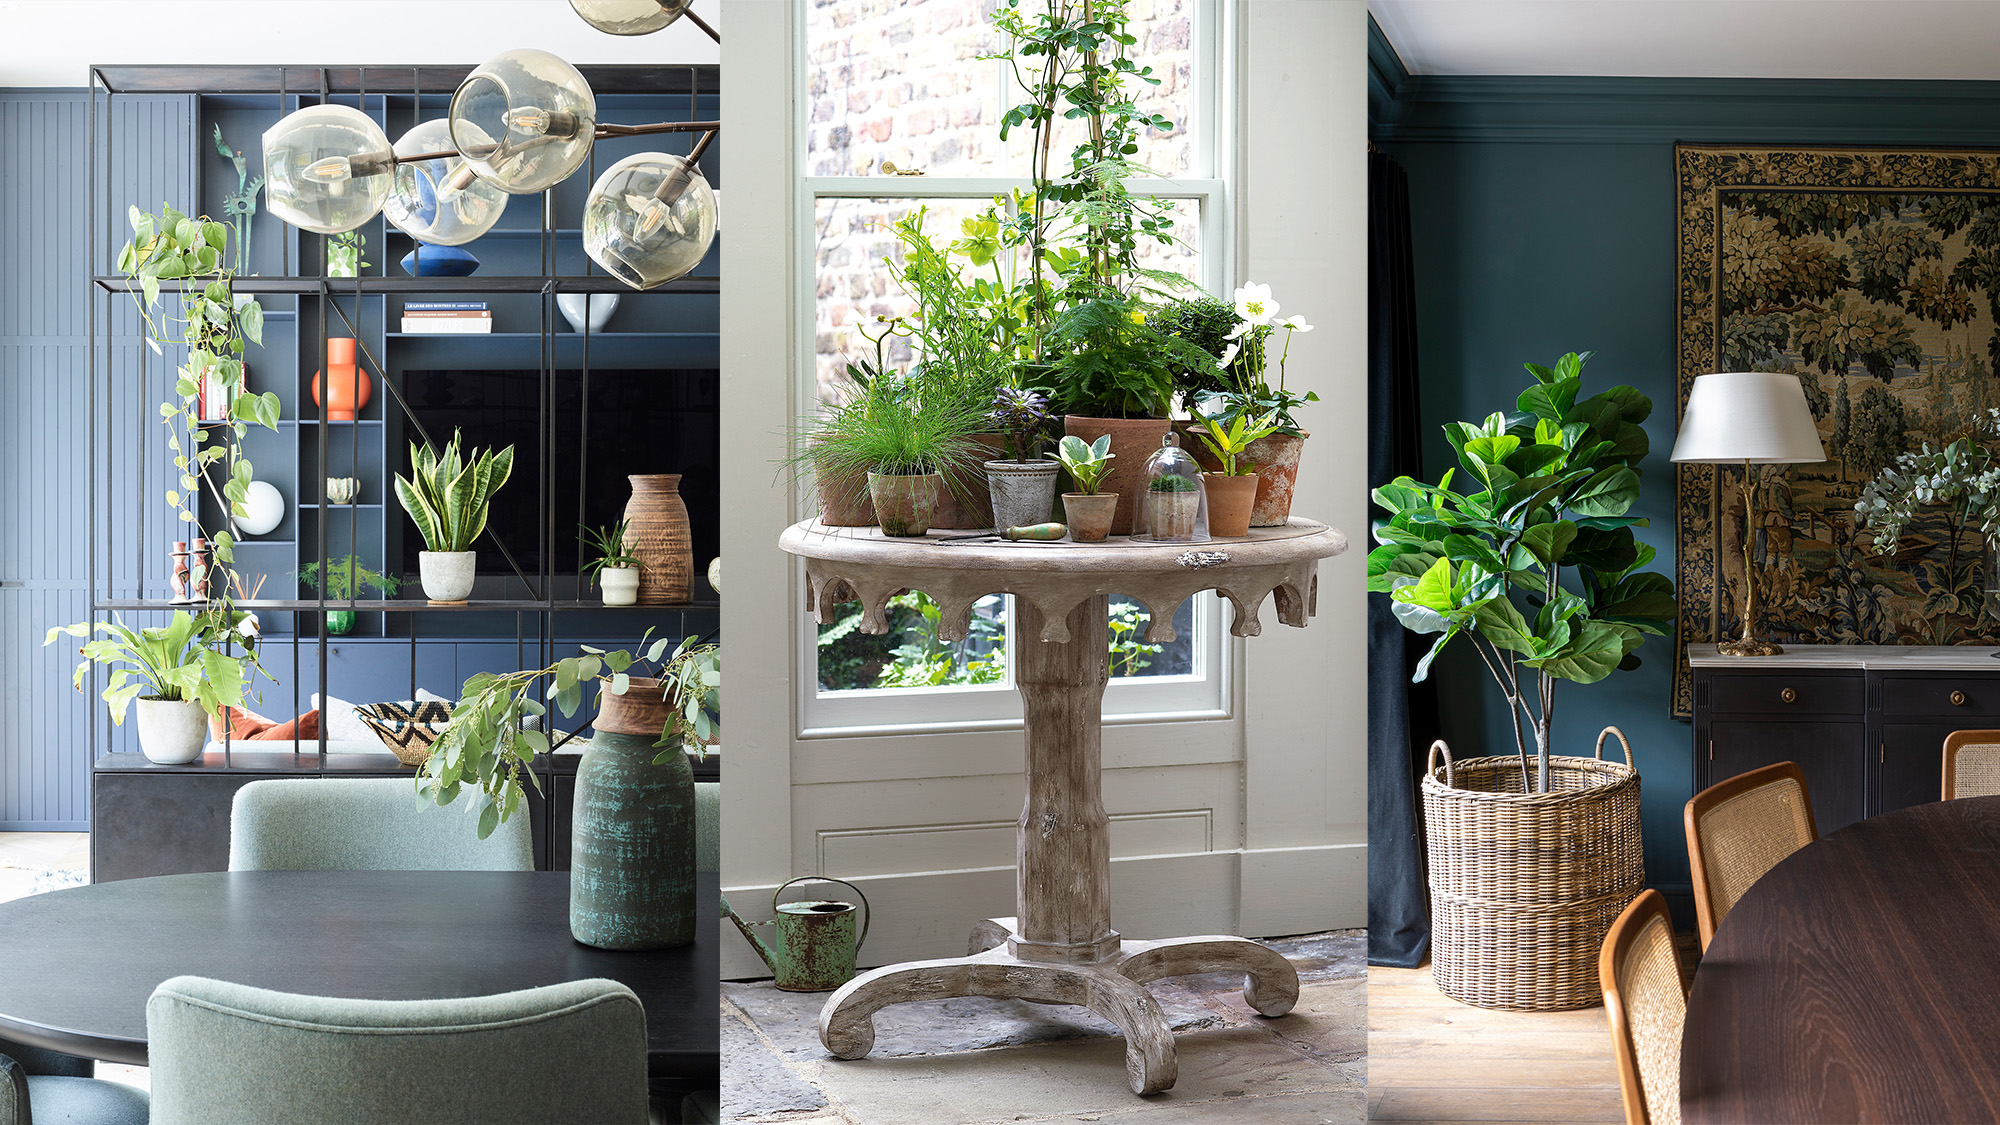 Decorating With Plants: 11 Ways To Display House Plants |